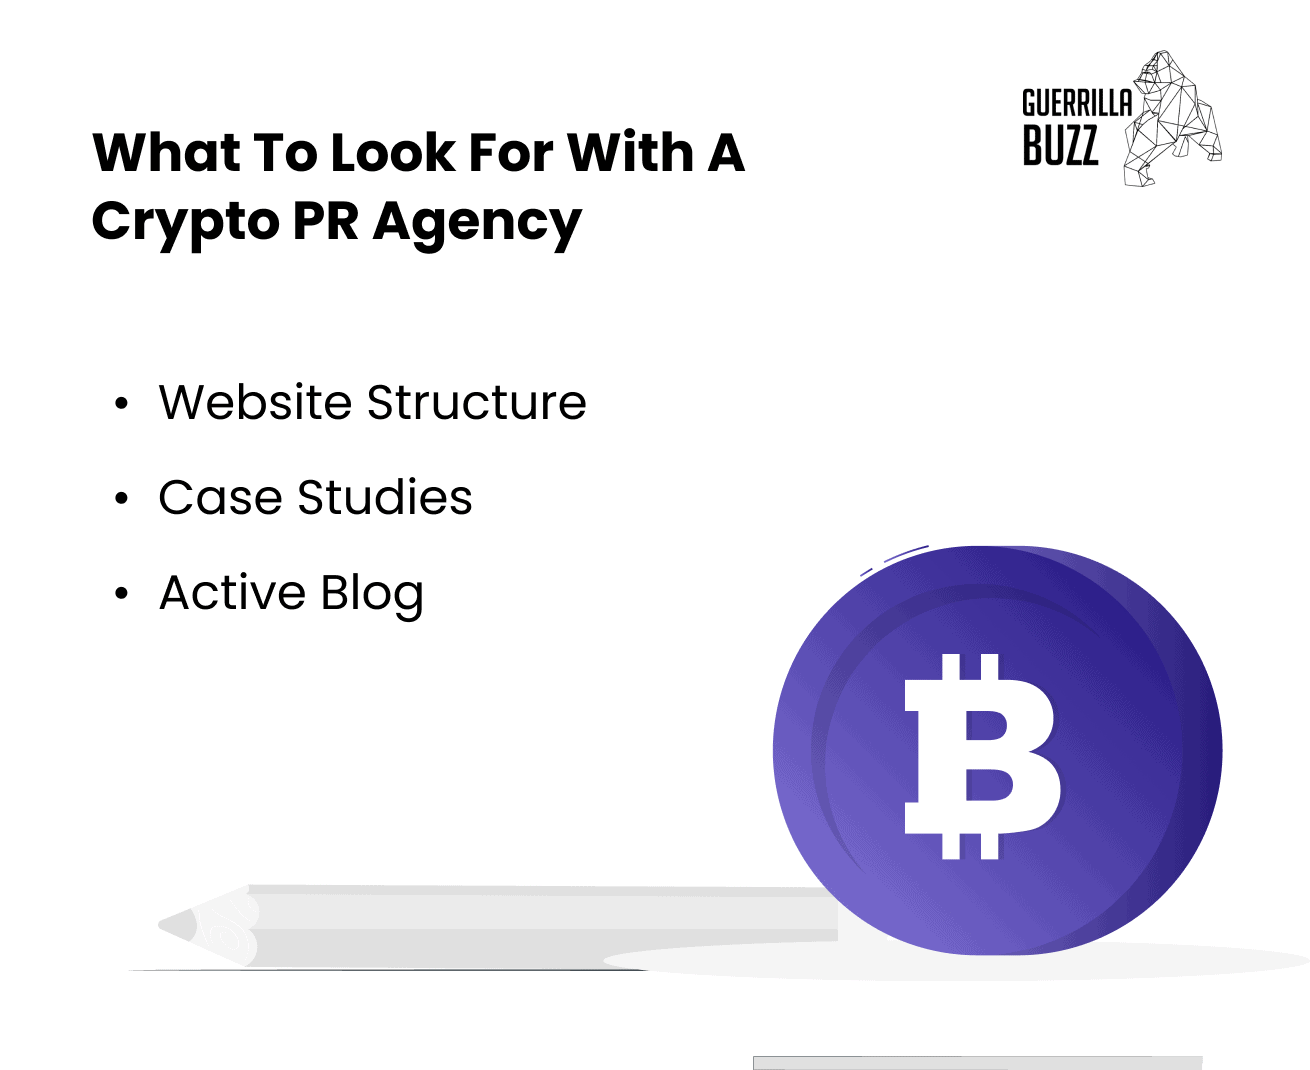 What to look for in a crypto PR agency